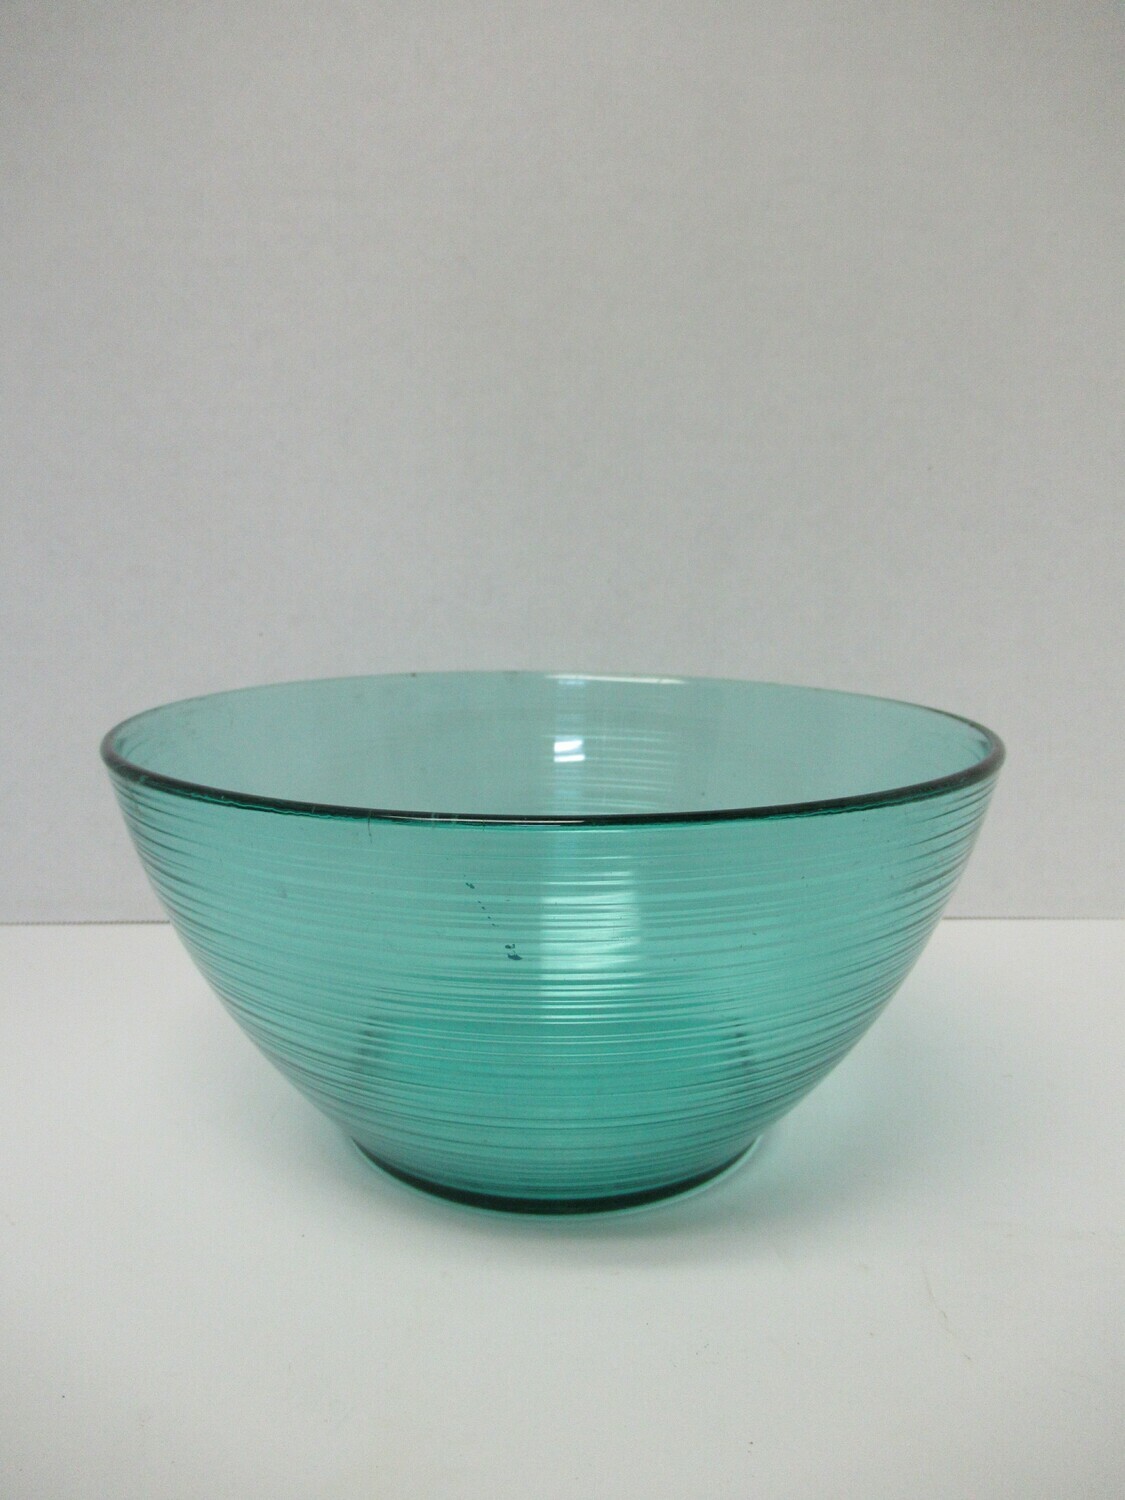 Large Arcoroc France Turquoise Teal Salad and Serving Bowl